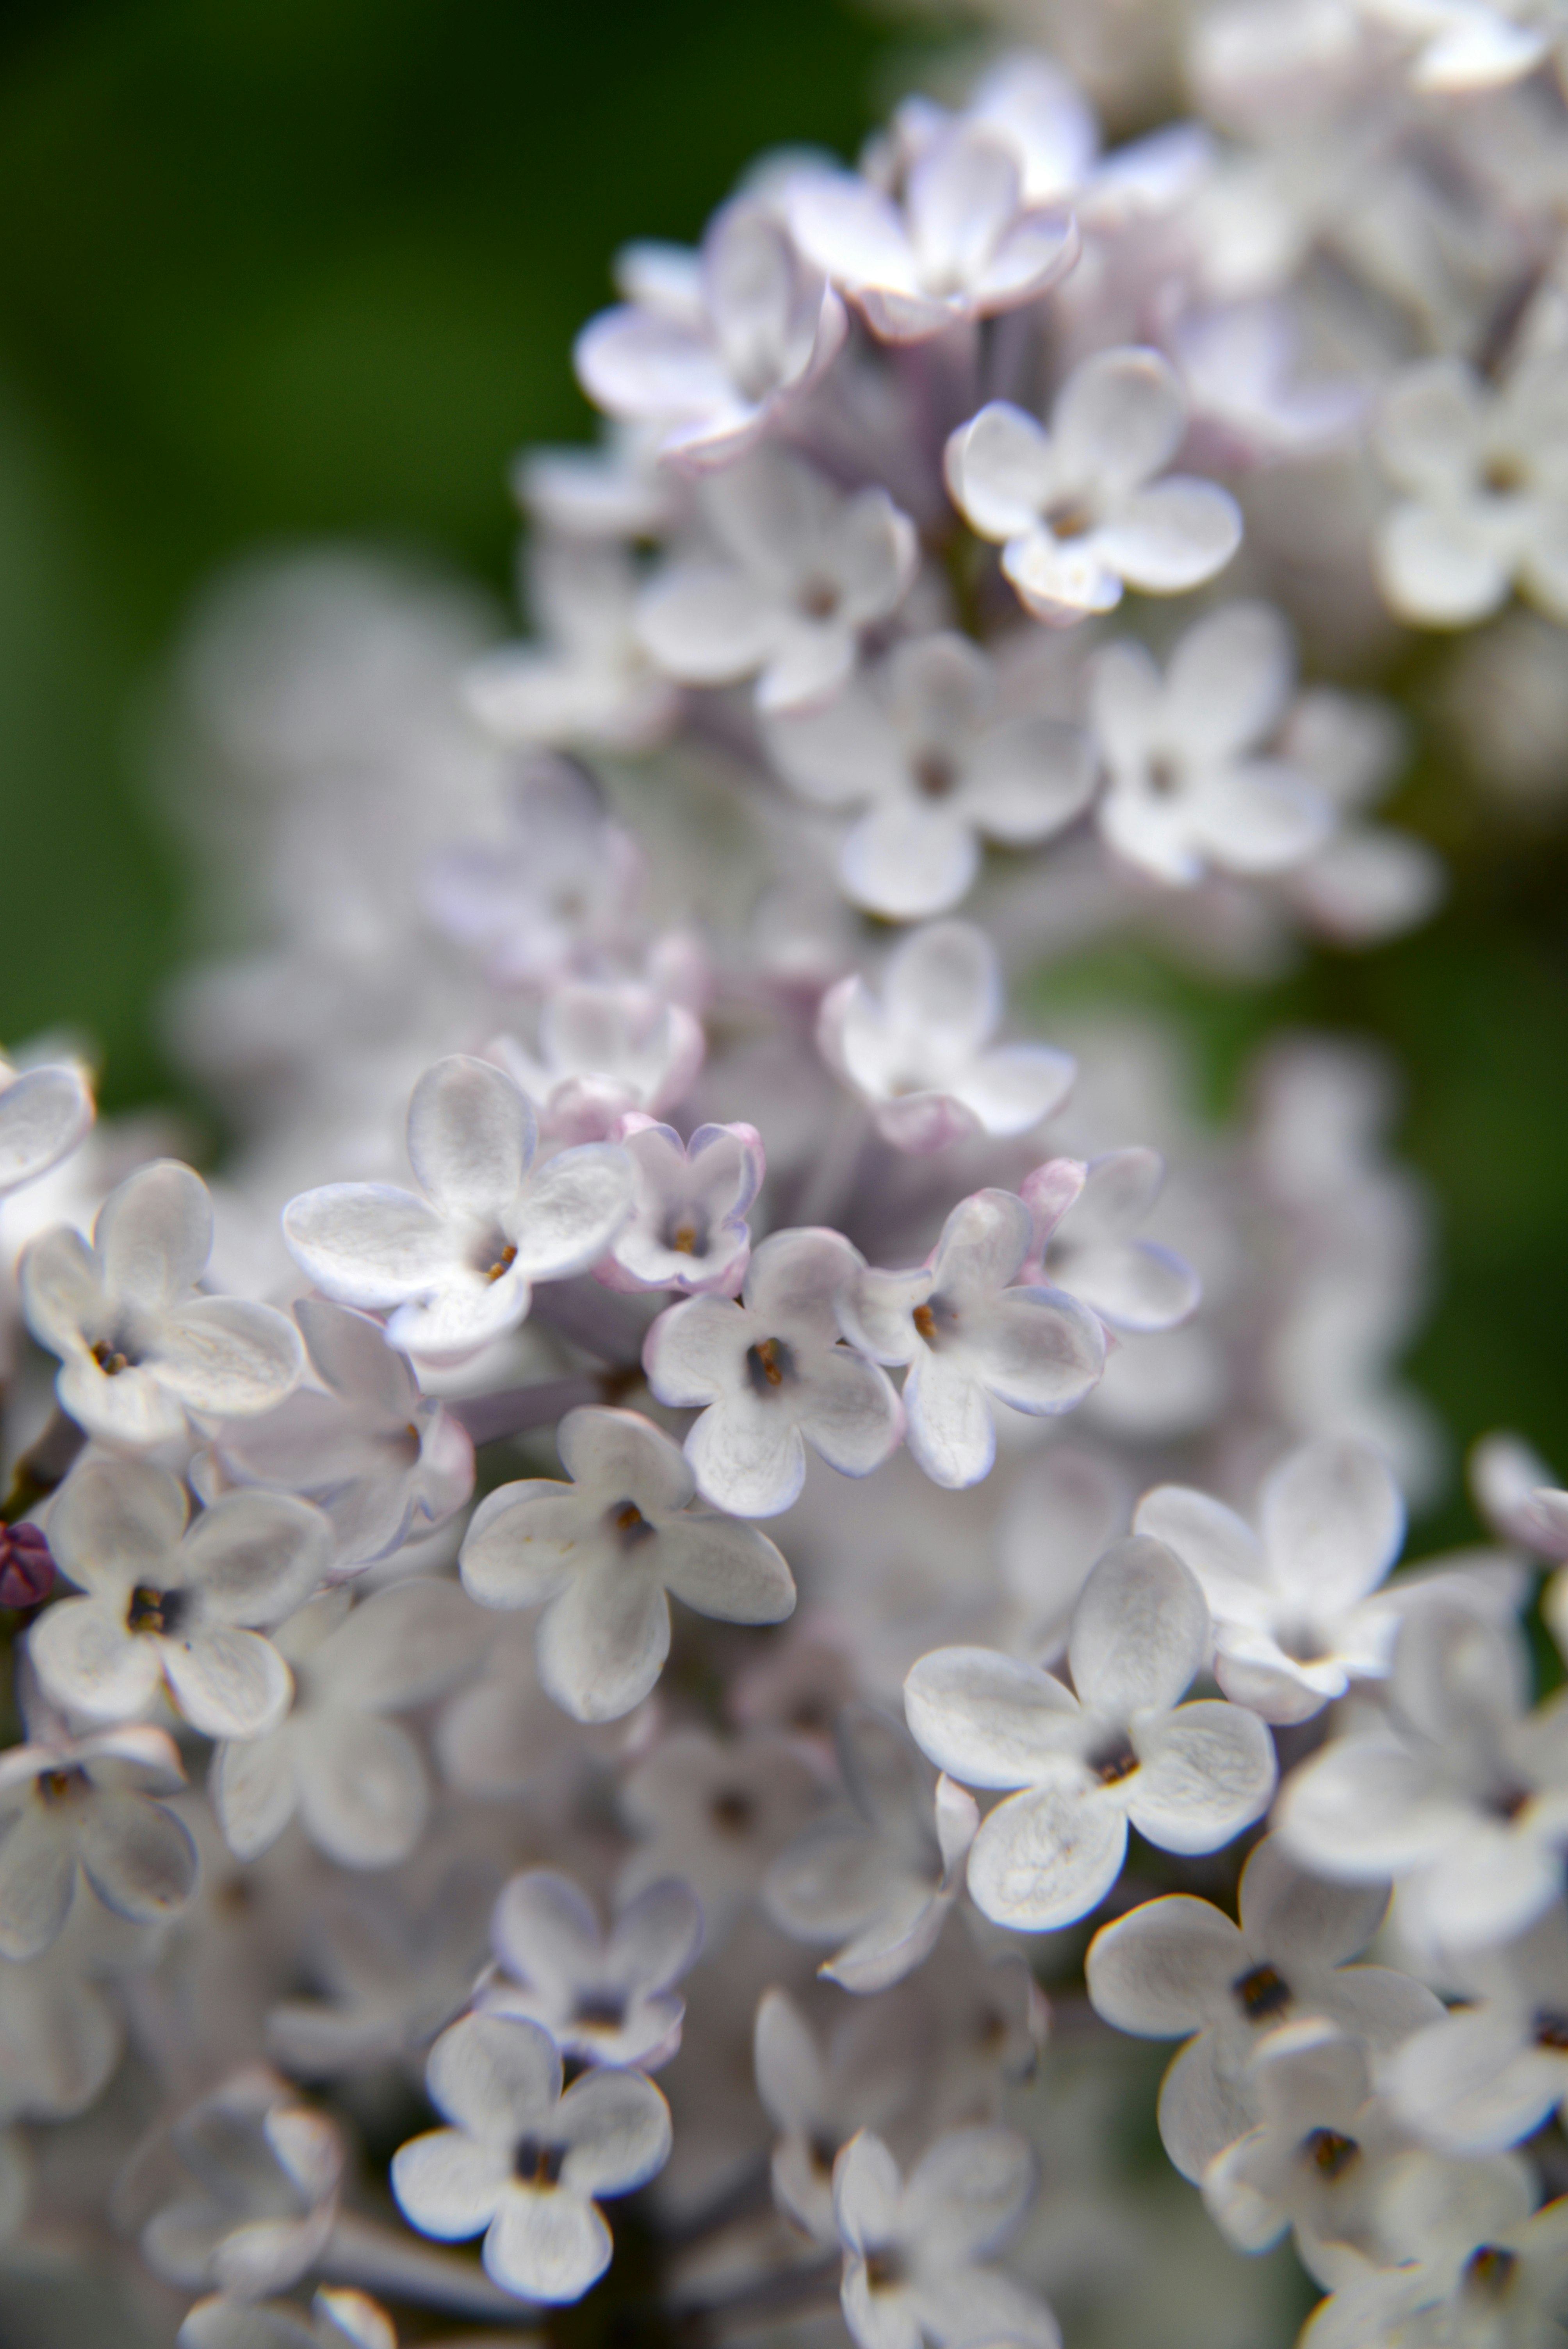 white and purple flower buds